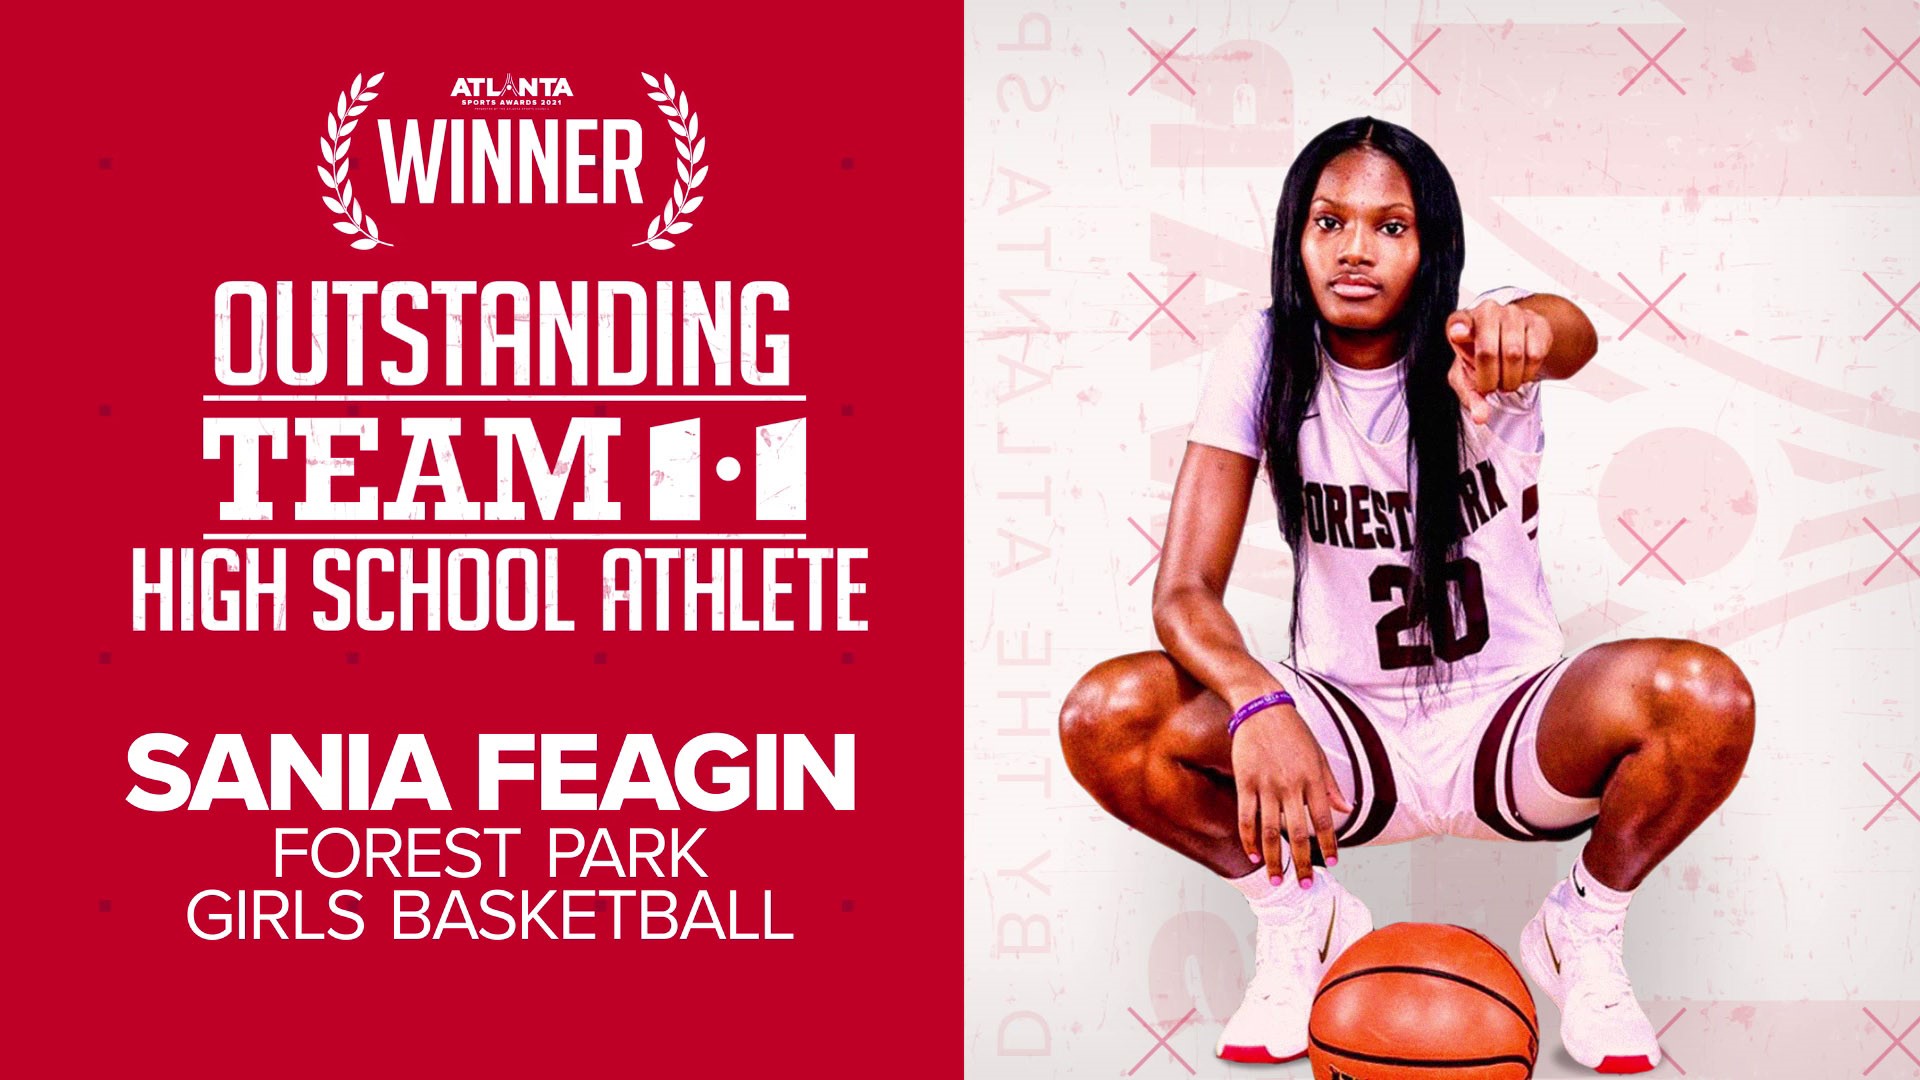 Sania Feagin is the second consecutive girls basketball player to win the Team11 award.